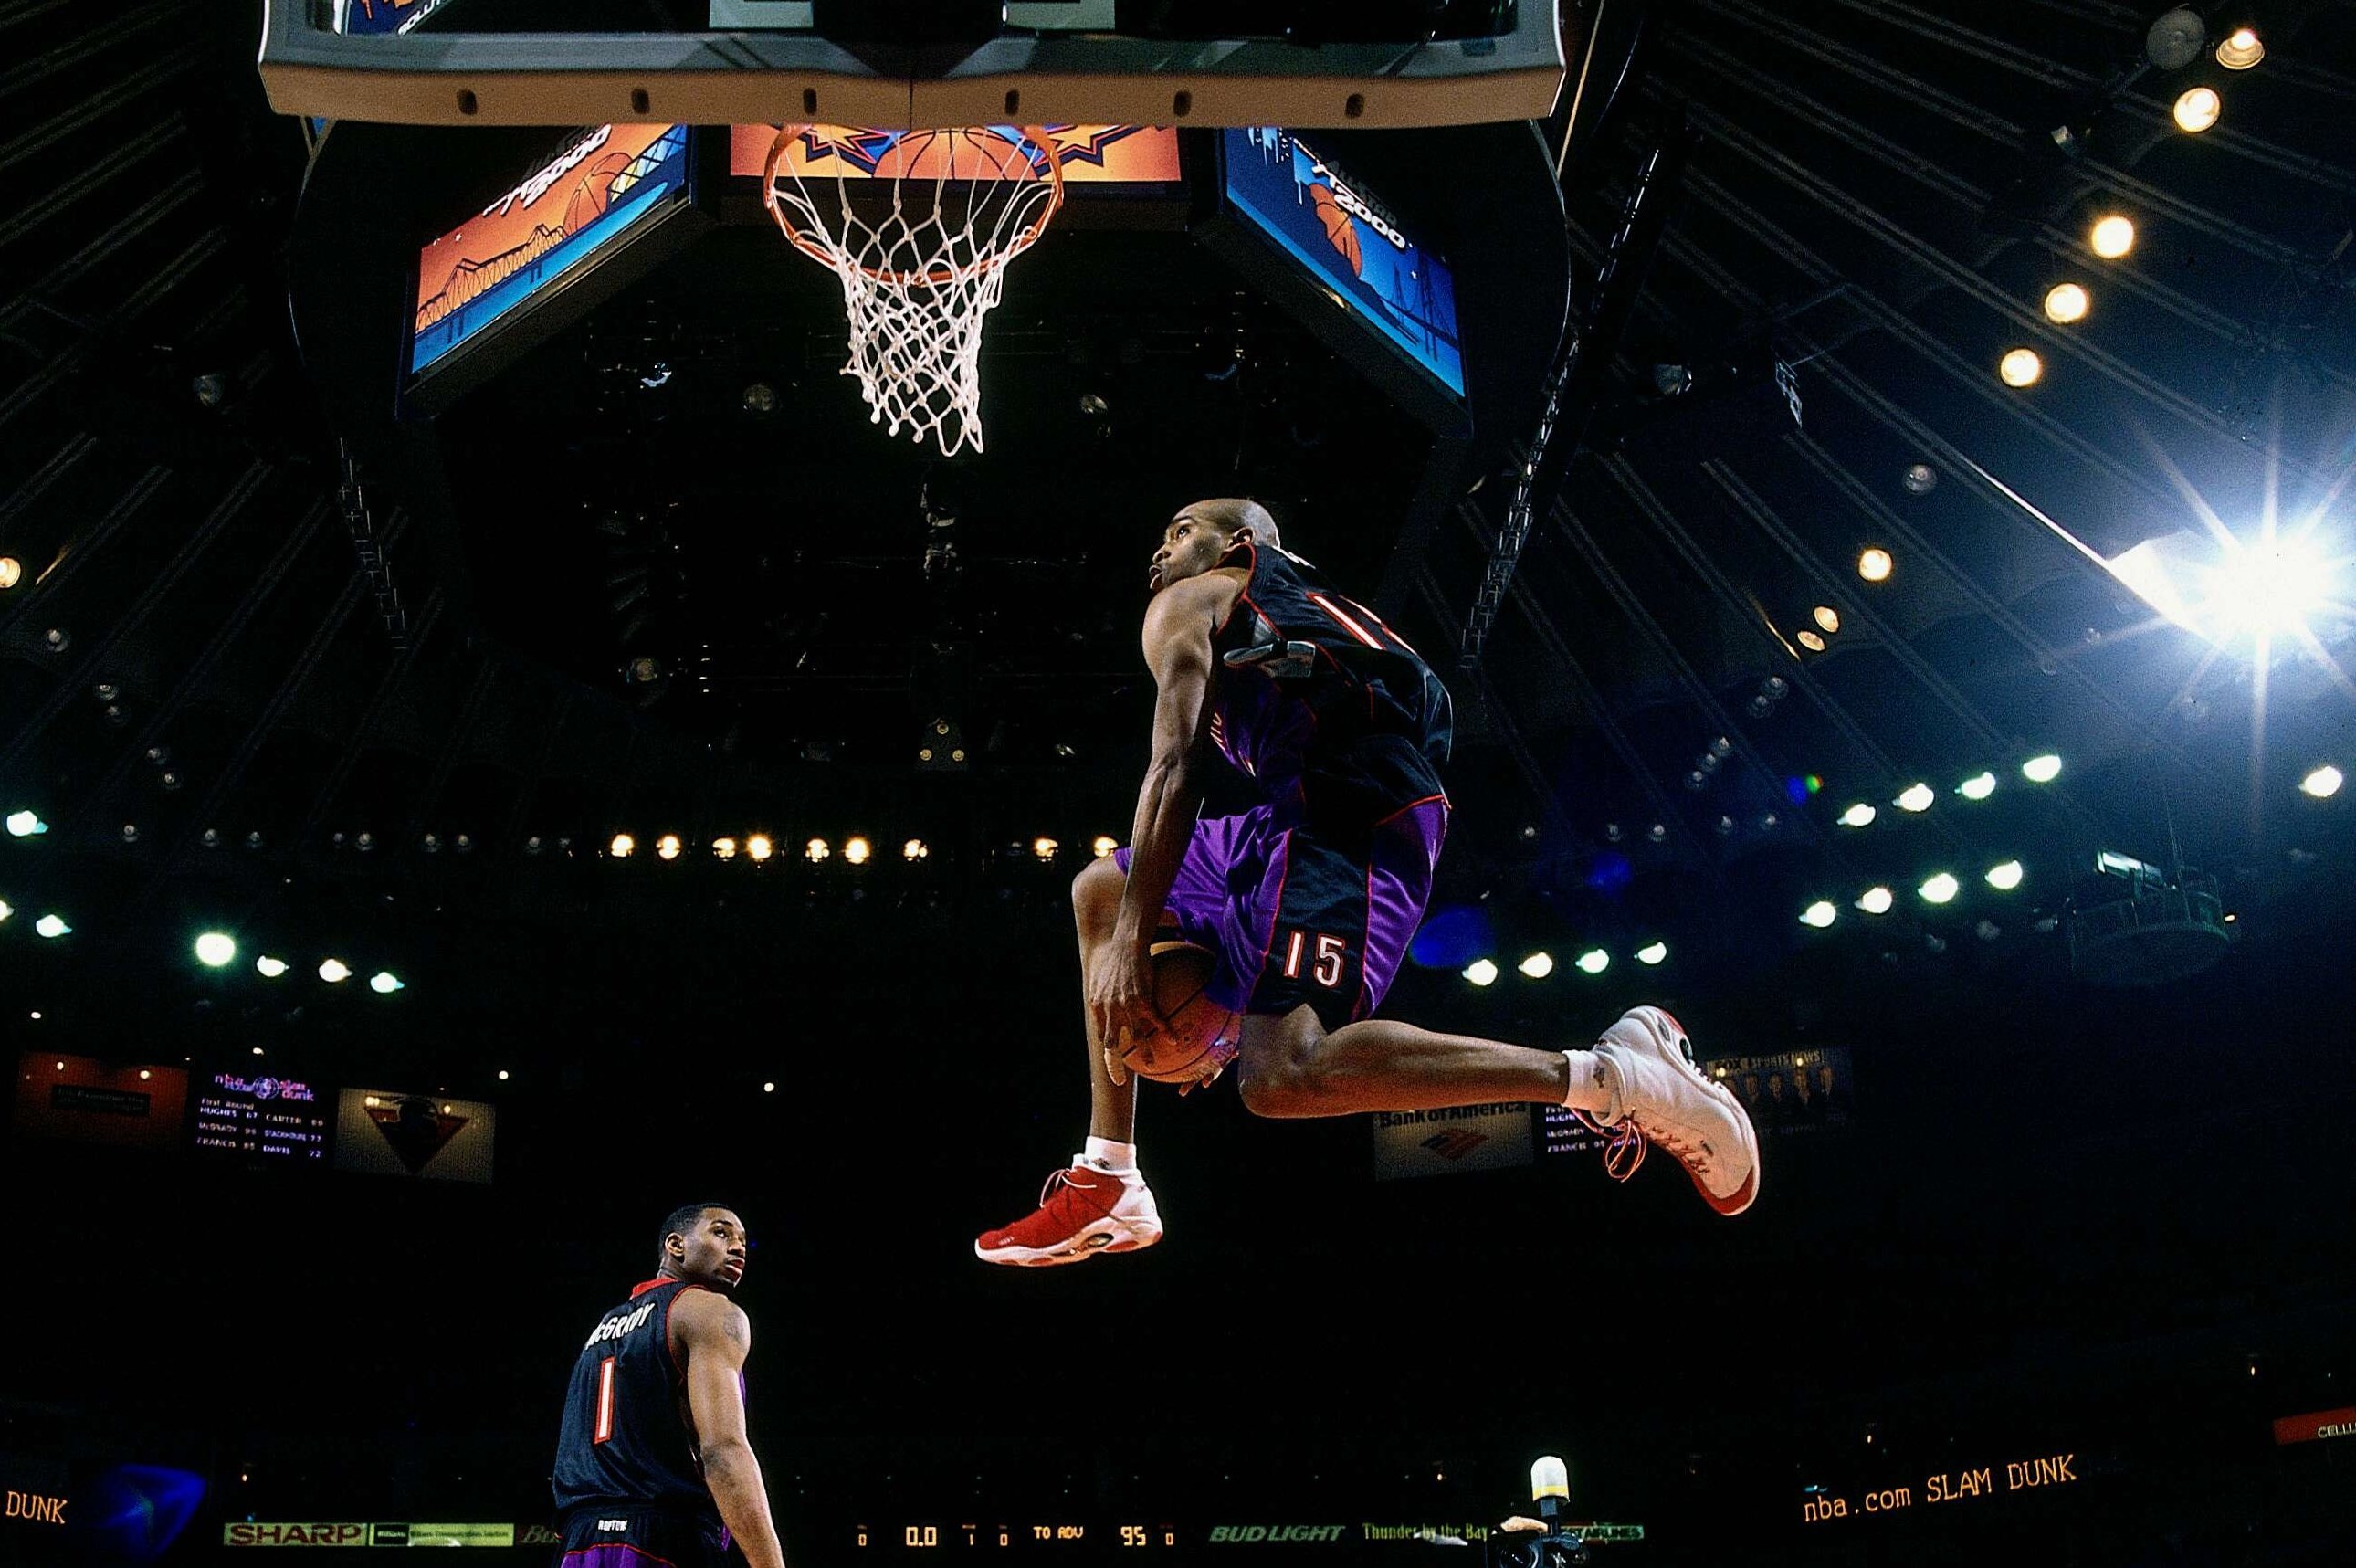 Vince Carter Was Impressed with the Dunk Contest, Told Zach LaVine 'Great Show' | News, Scores, Highlights, Stats, and Rumors | Bleacher Report